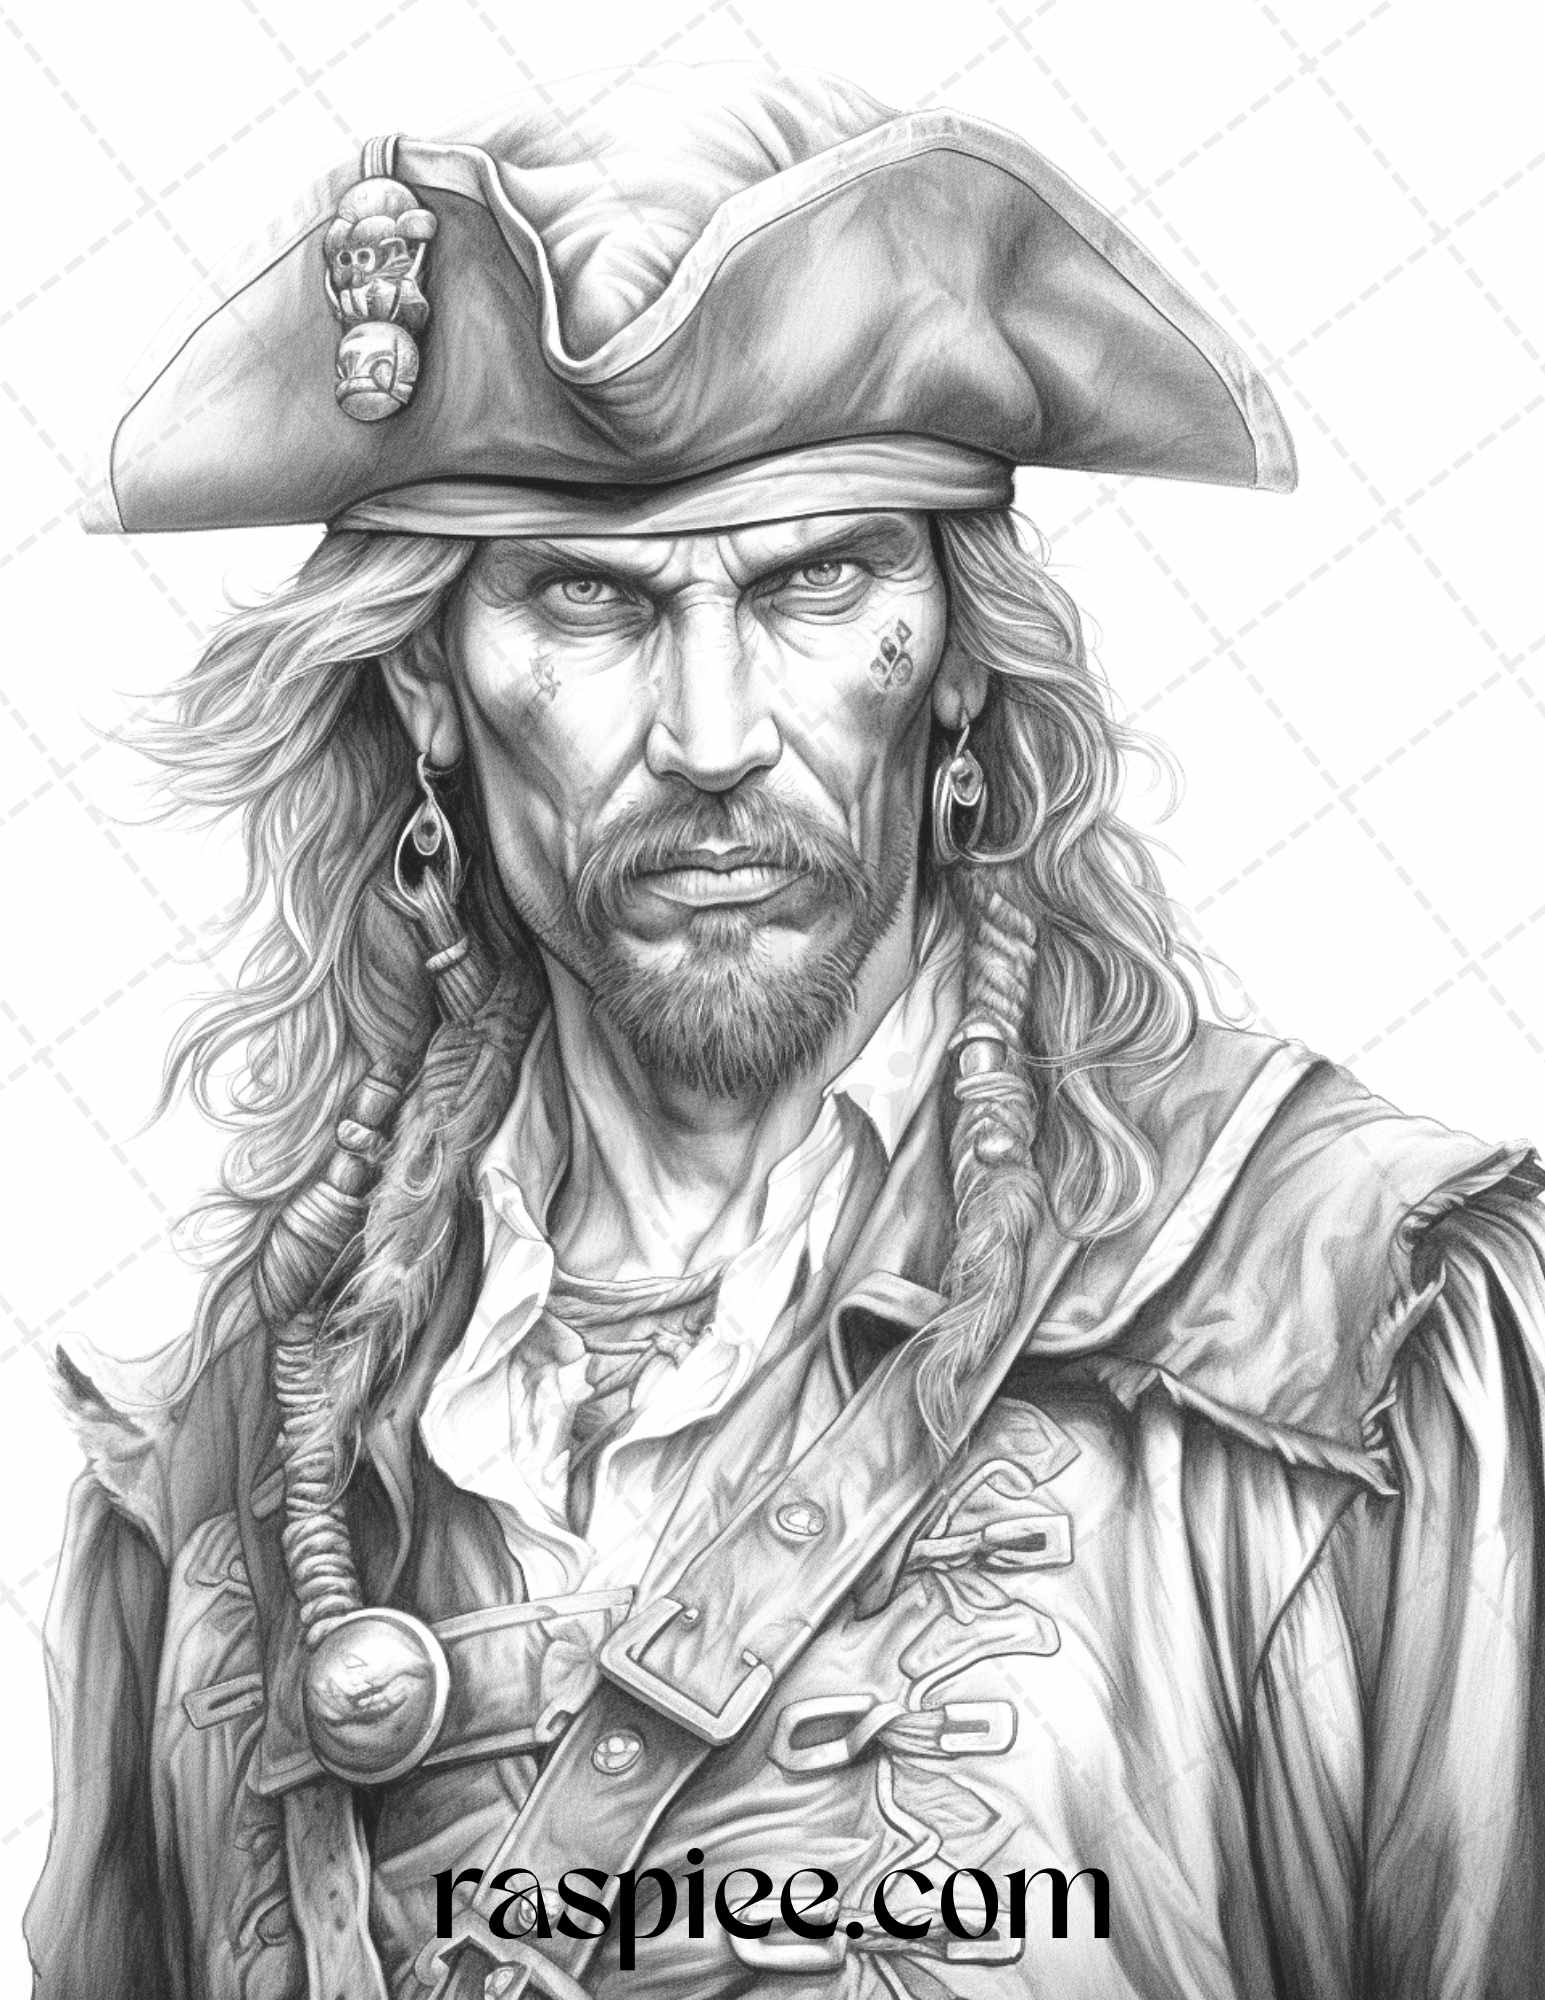 60 Pirate Life Grayscale Coloring Pages Printable for Adults, Stress Relief Coloring, PDF File Instant Download - Raspiee Coloring